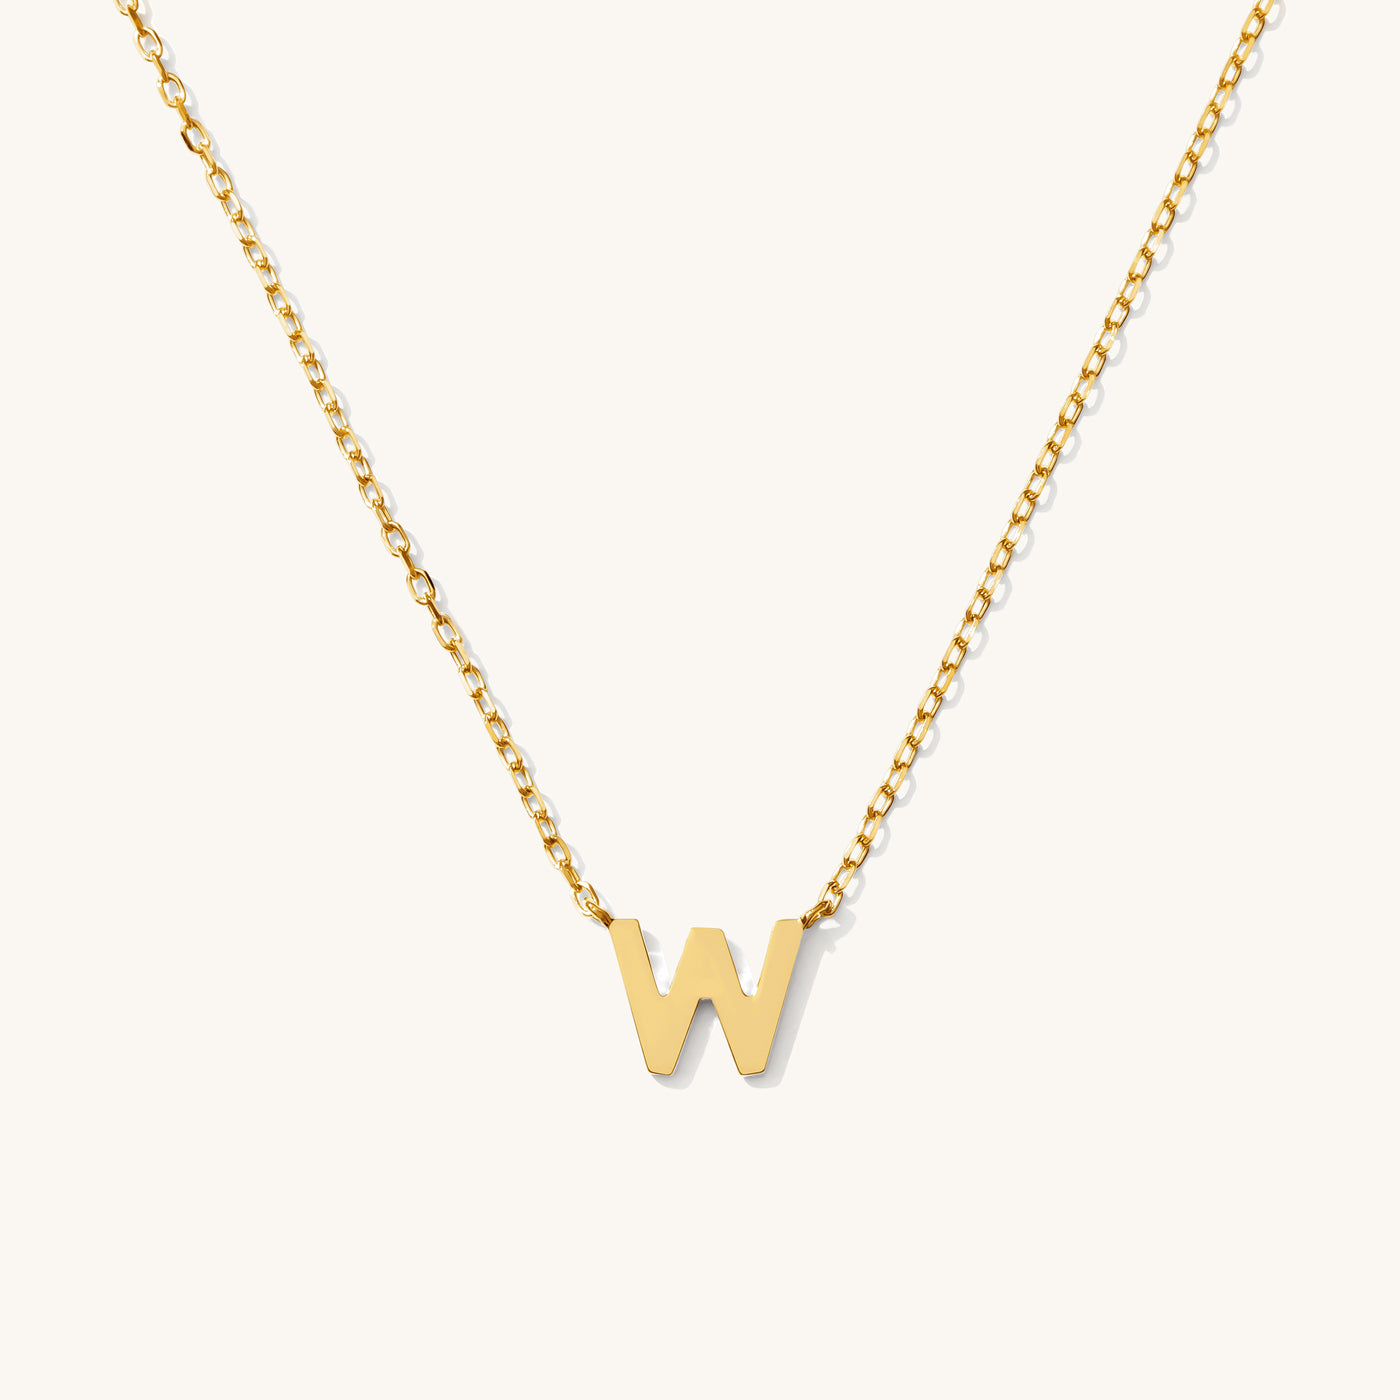 W Tiny Initial Necklace - 14k Solid Gold